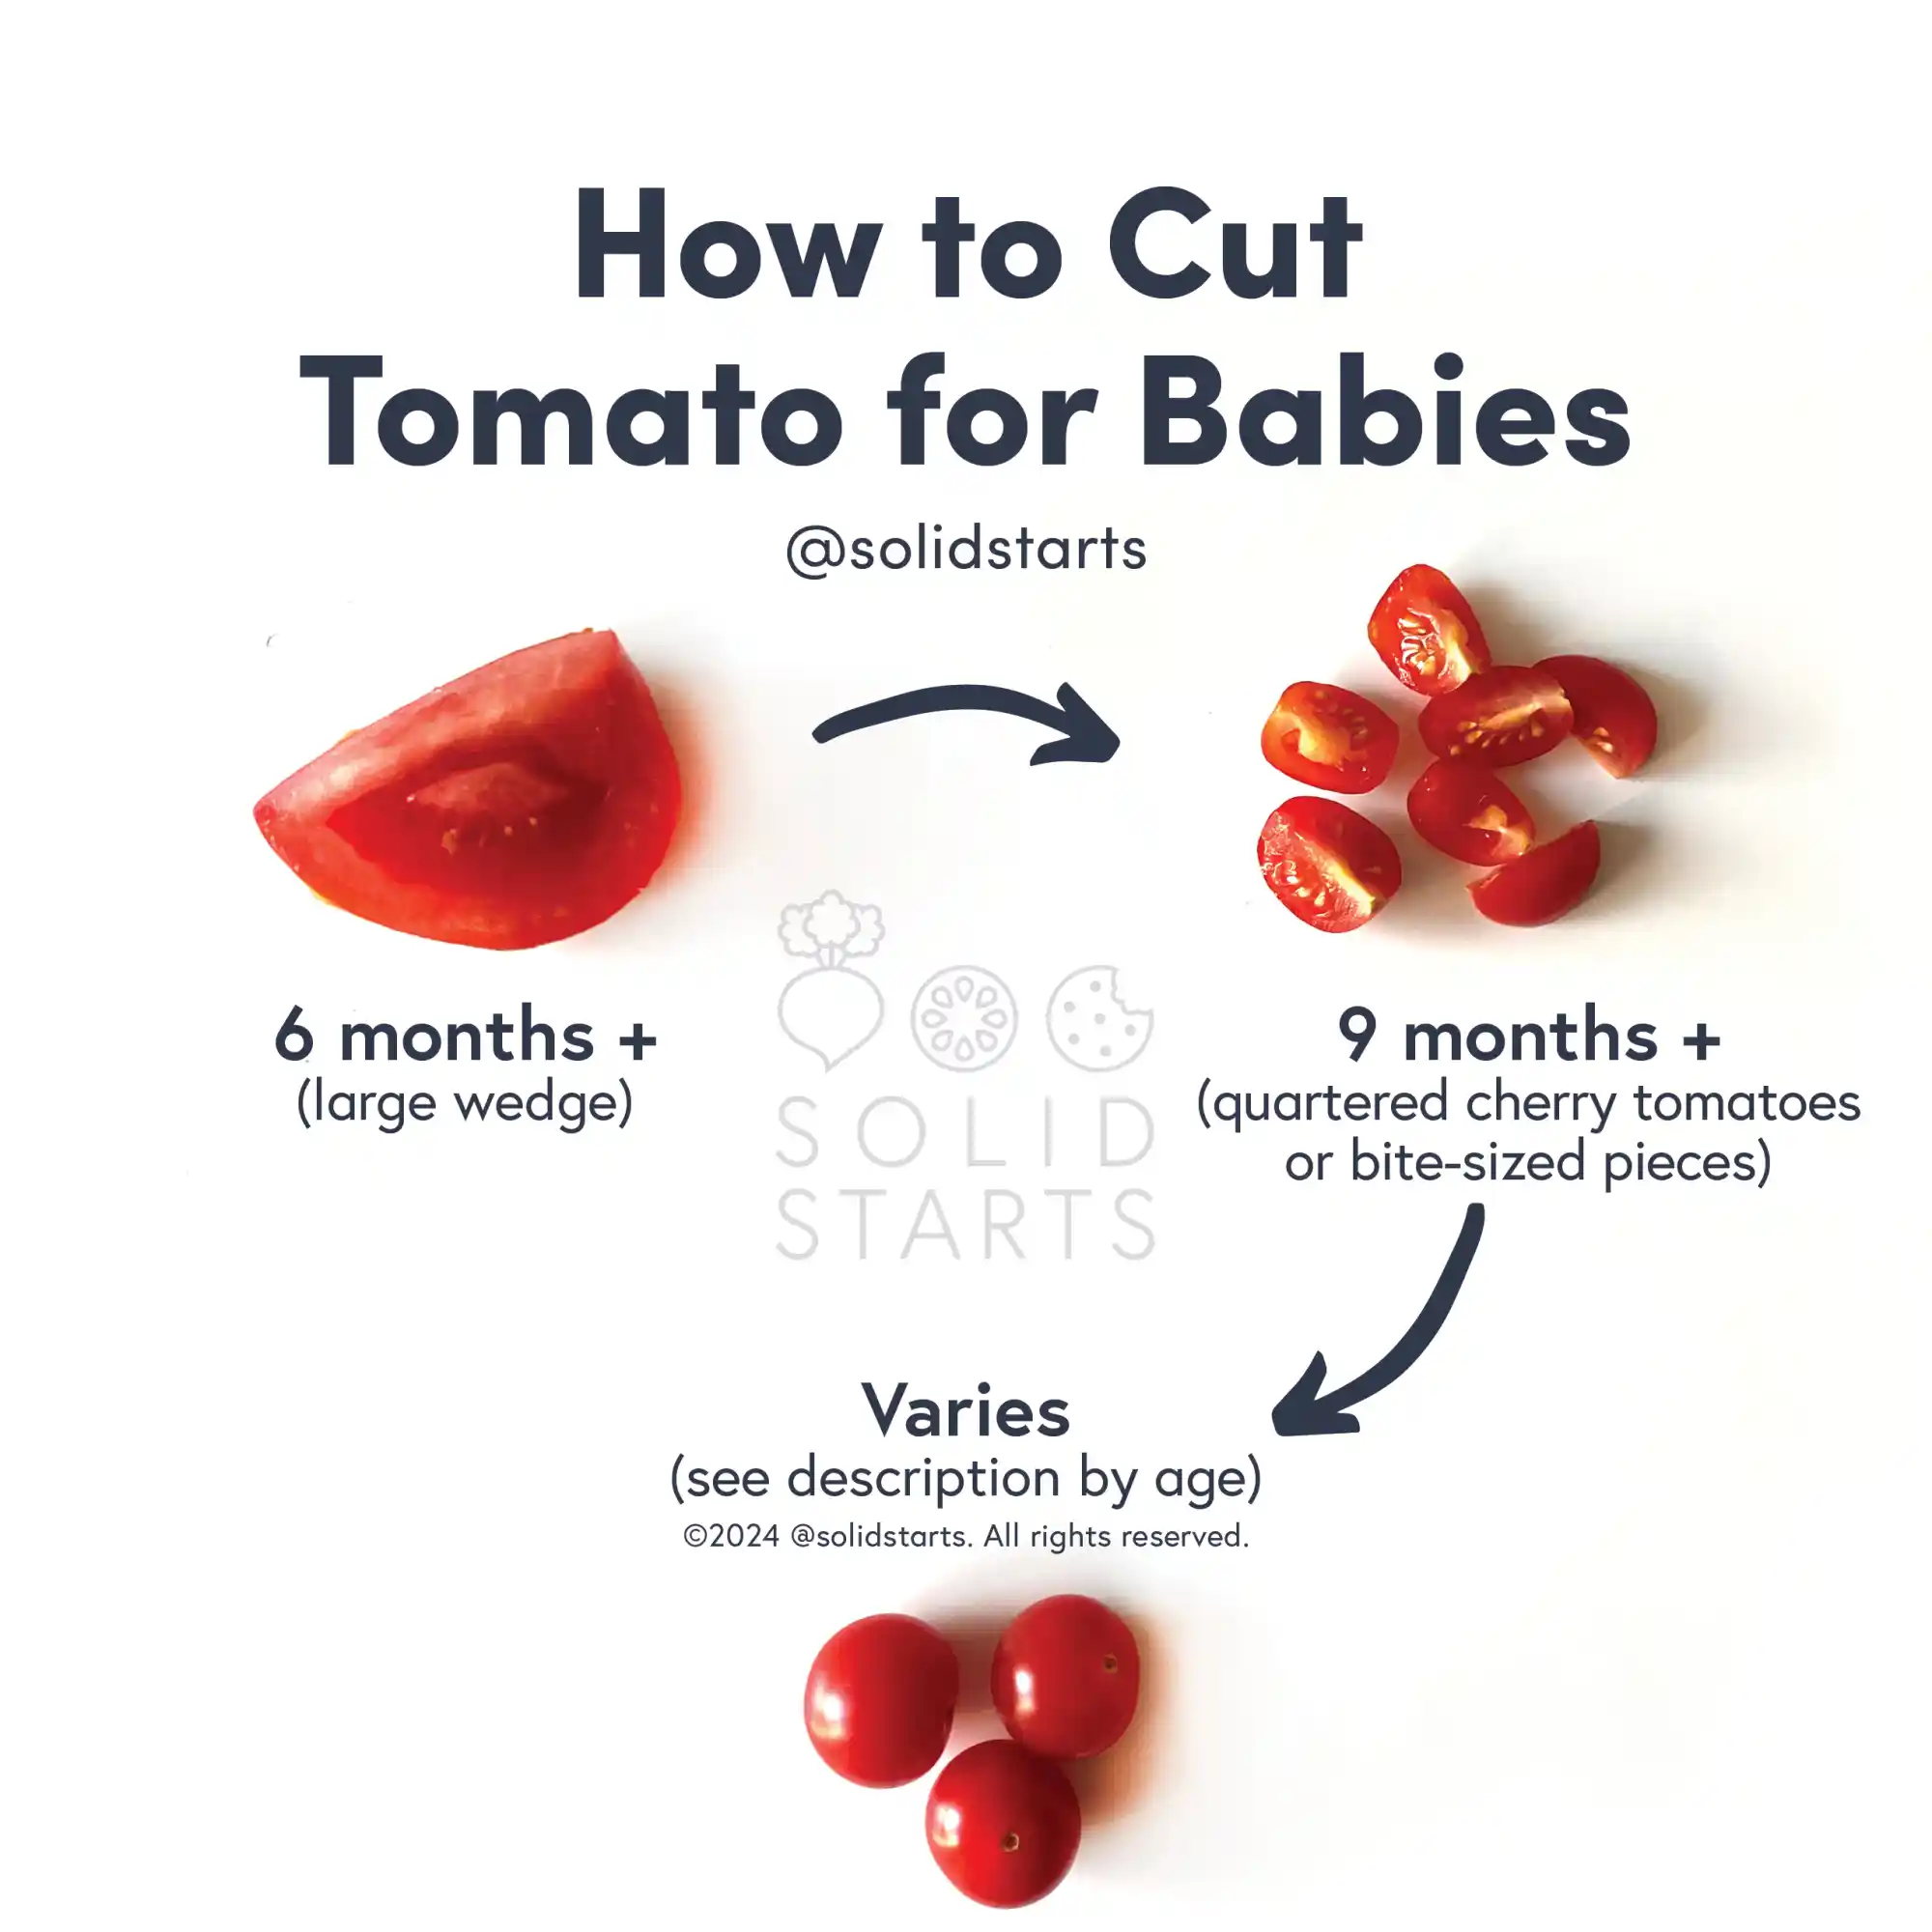 a Solid Starts infographic with the header "How to Cut Tomato for Babies": a large wedge for 6-9 mos, quartered cherry tomatoes for 9-18 mos, and varies for whole cherry or grape tomatoes